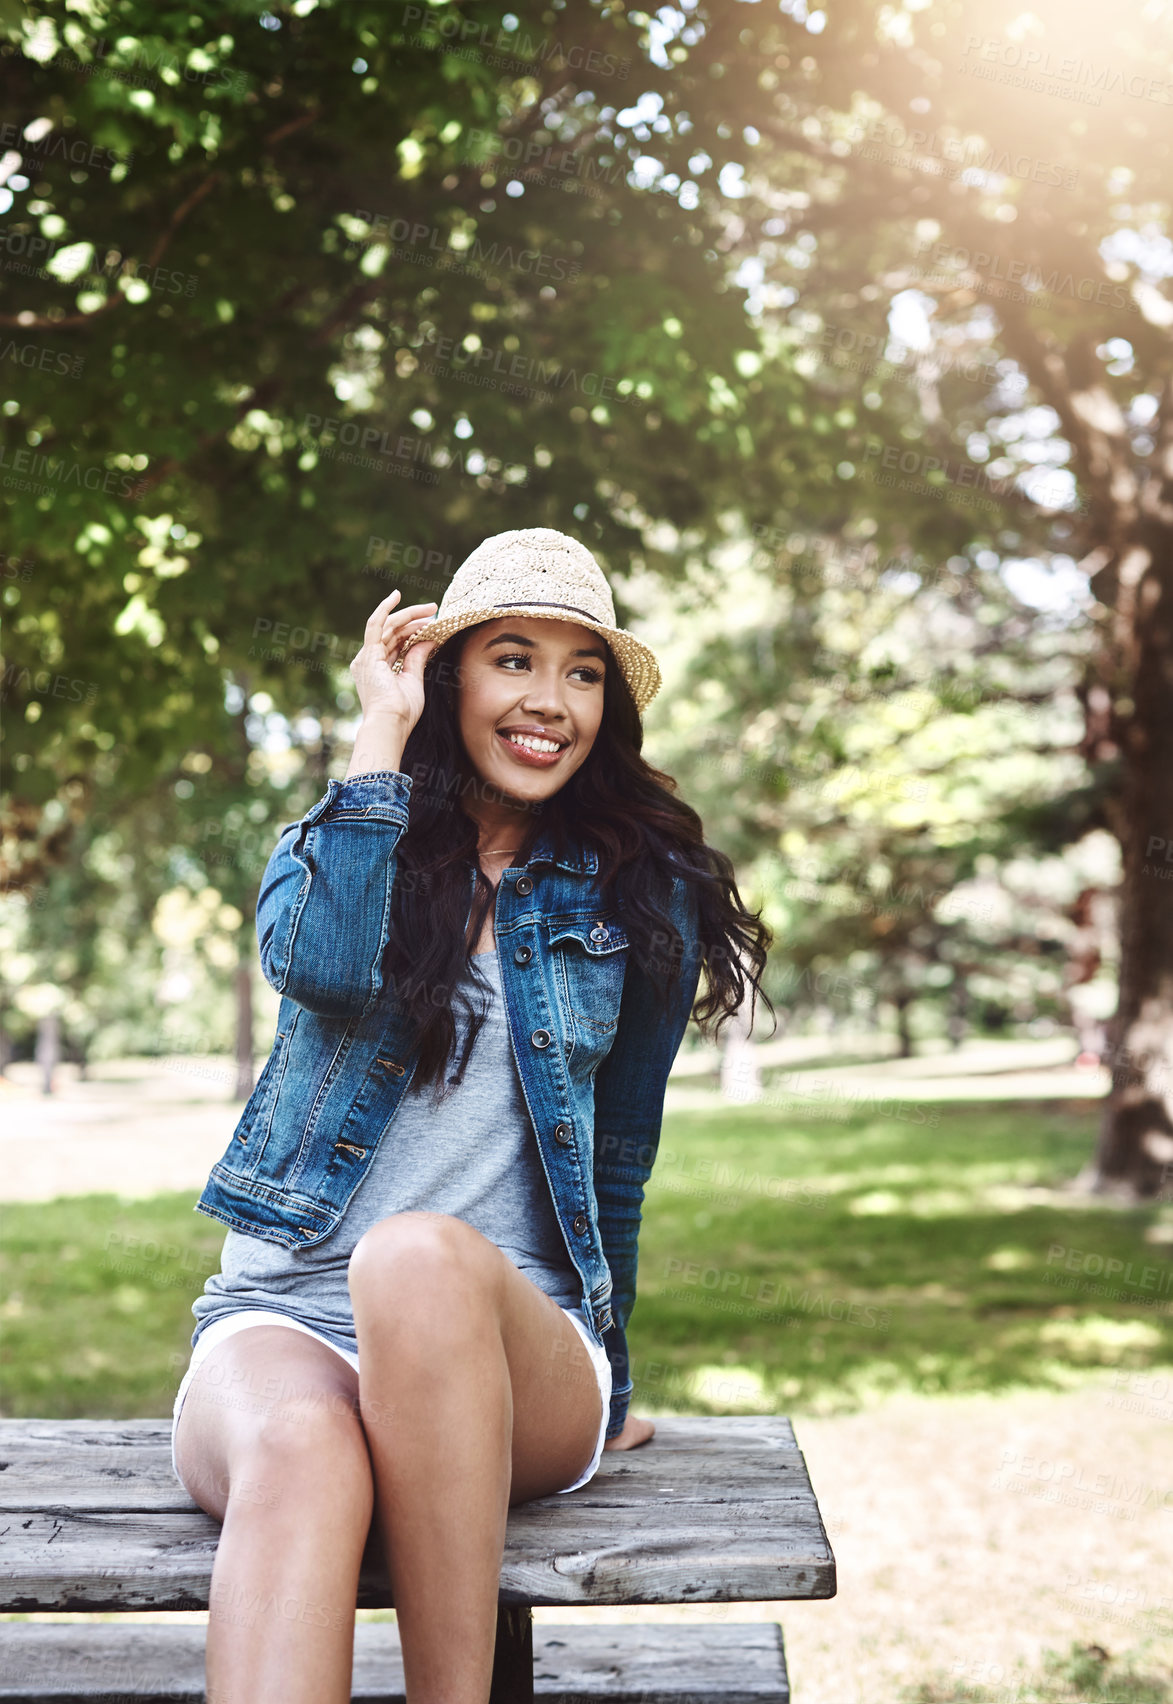 Buy stock photo Shot of an attractive young woman spending a day in the park